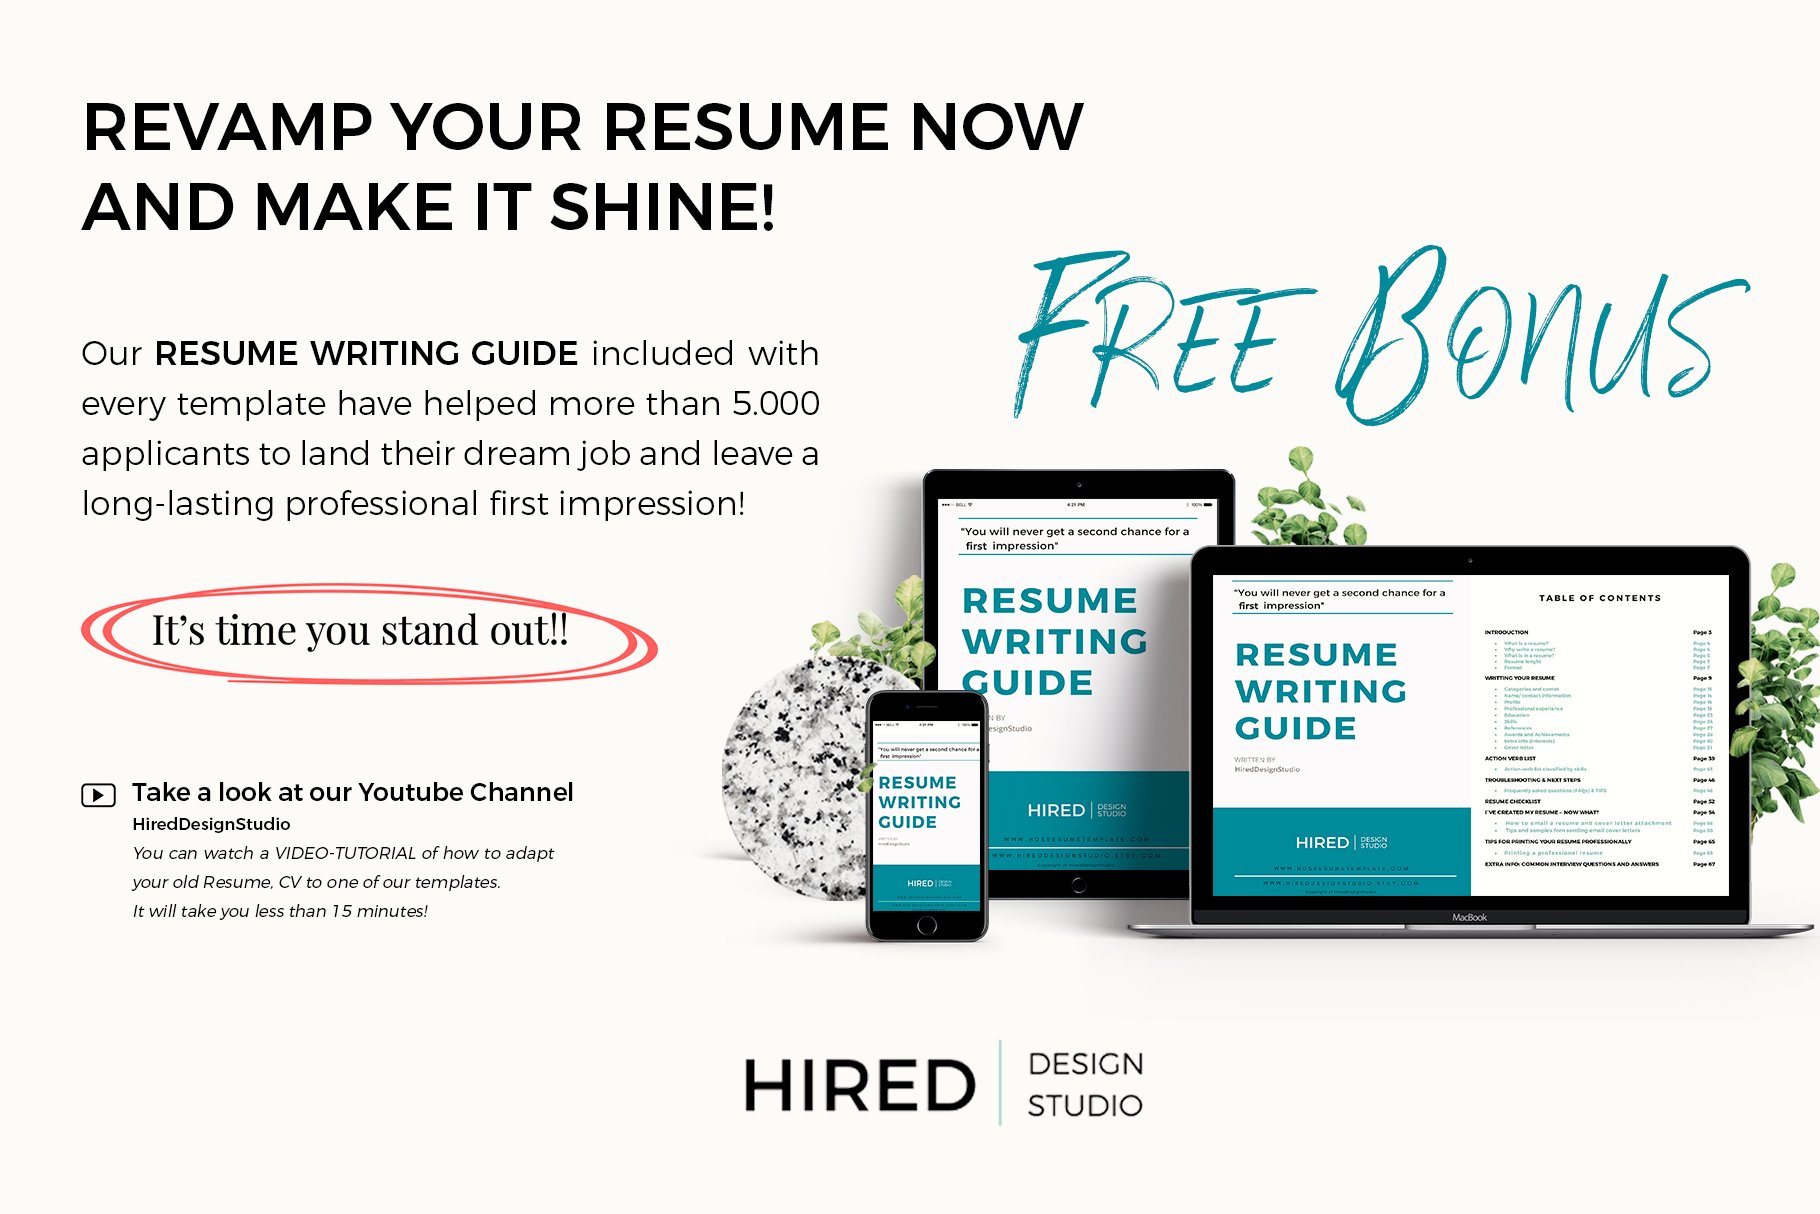 bonus resume writing tips and tricks to succesfully face a job interview 396